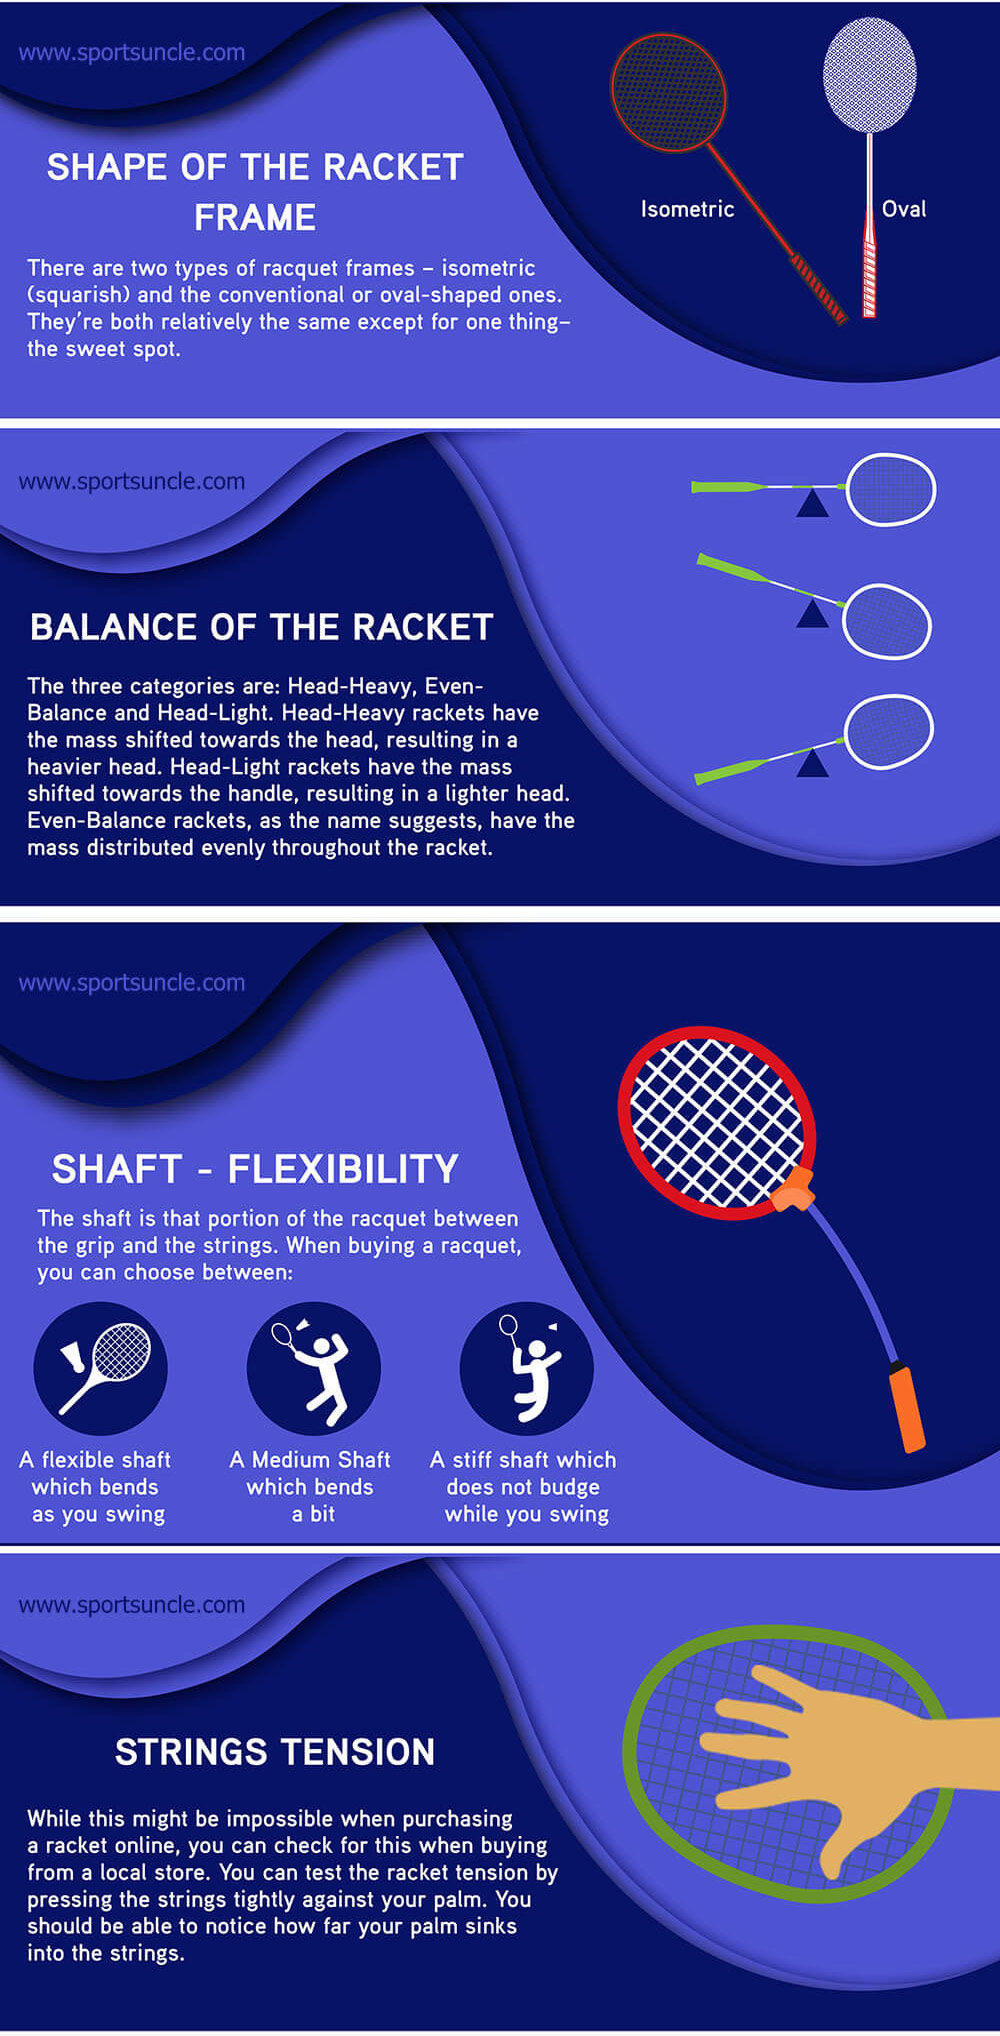 5 Must-Have Badminton Equipment for Serious Players